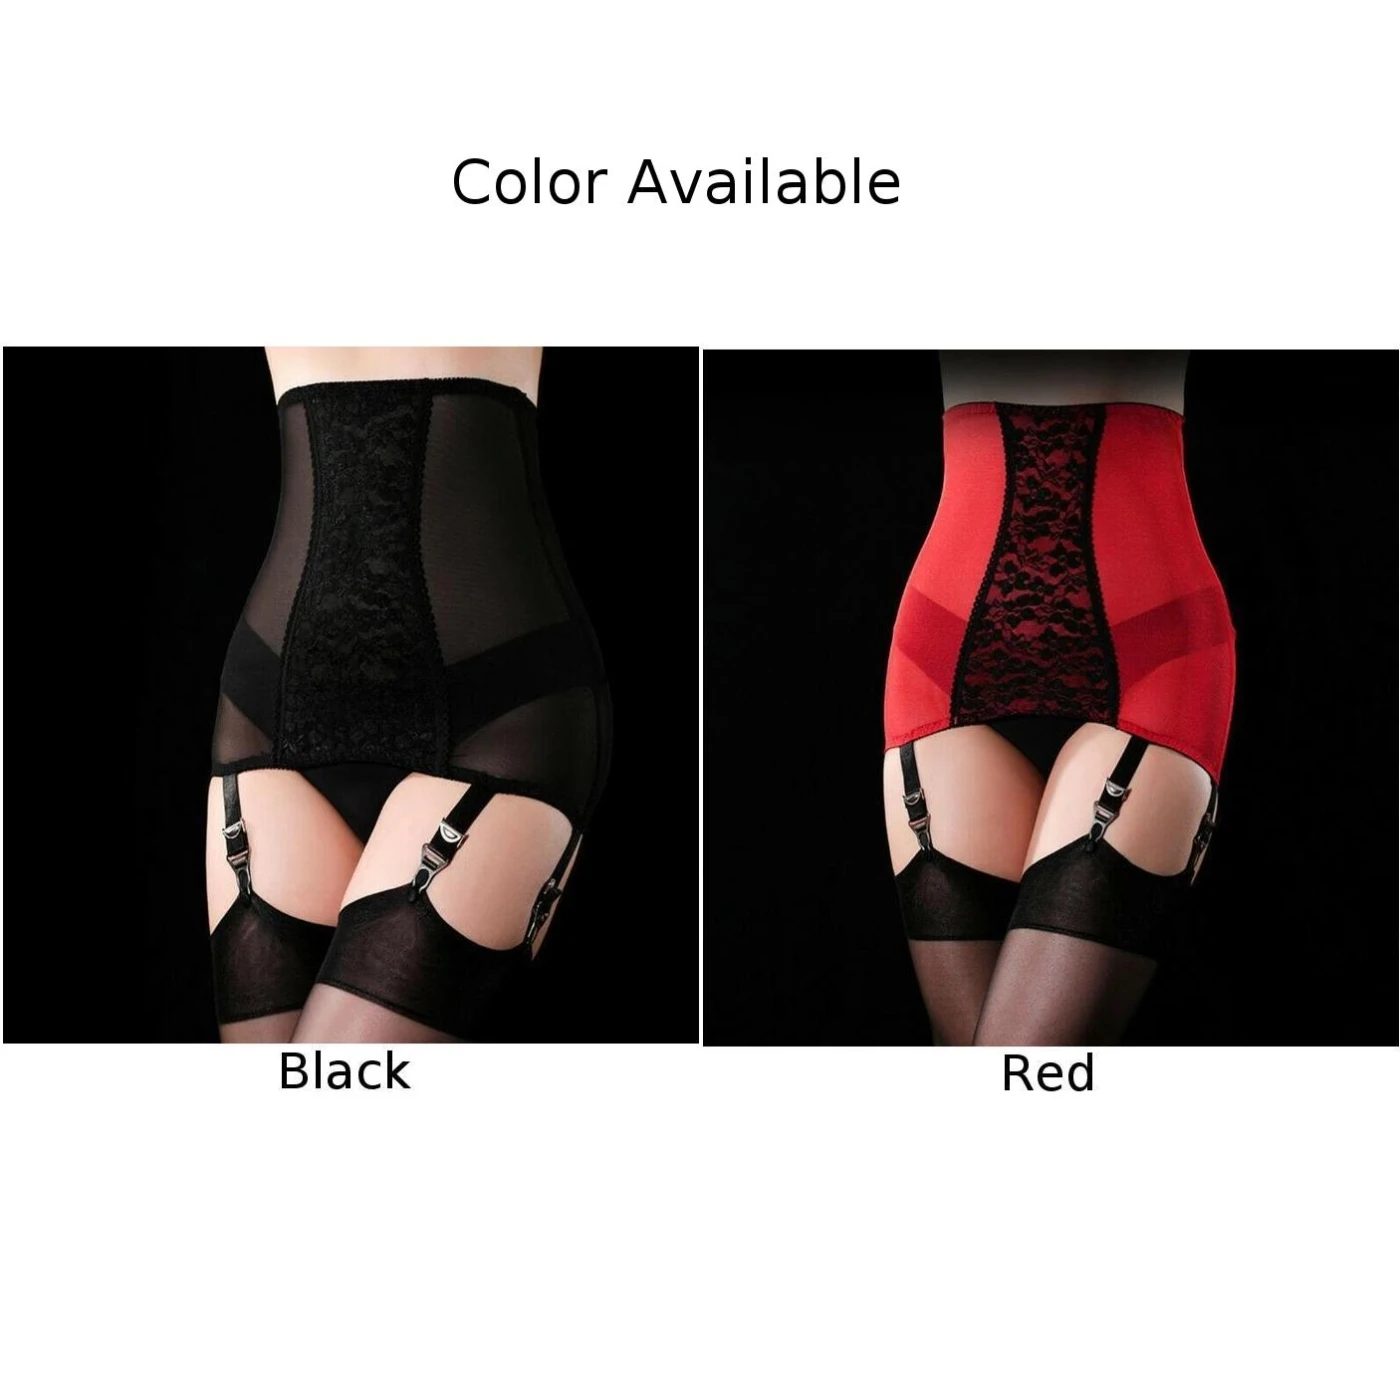 Red Vintage Girdle Lace Garter Belt Plus Size Womens Sexy Black Suspender  Belt With 6 Straps Metal Clip For Stockings Lingerie, Beyondshoping